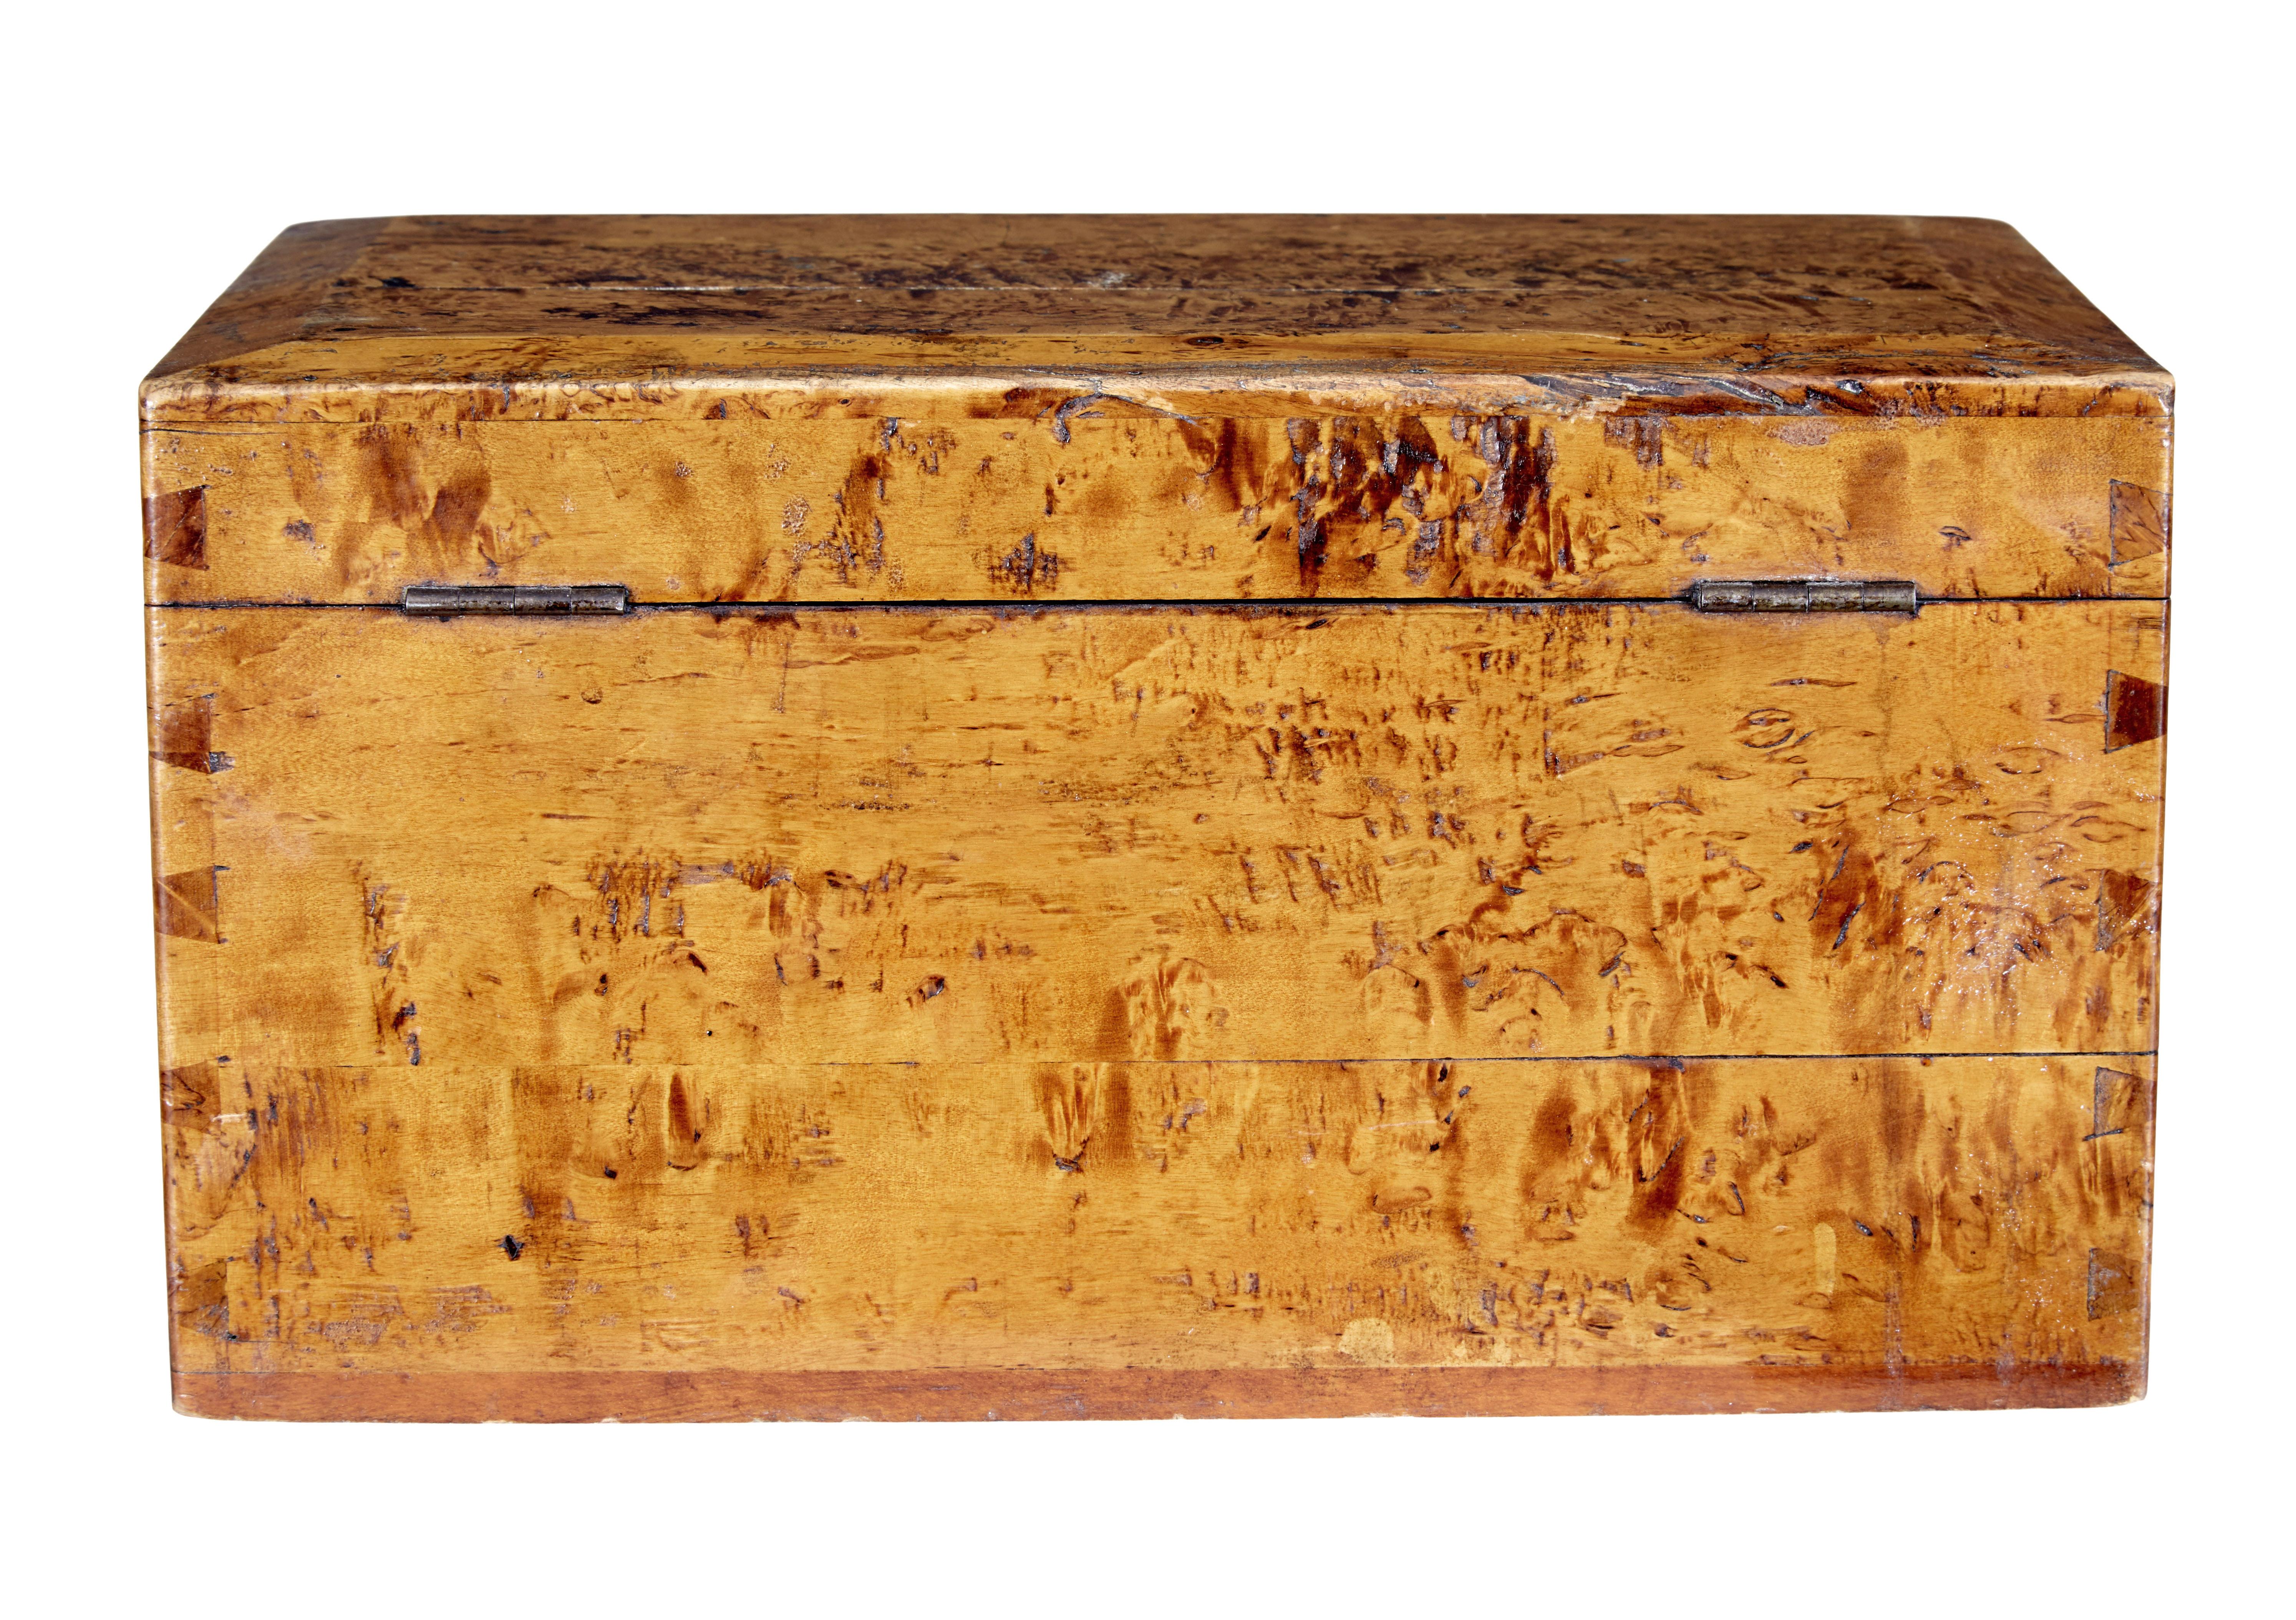 19th century burr birch sugar box circa 1870.

Fine piece of history showing how sugar used to be processed.  Birch root box with a fitted interior of a hinged knife on block for cutting sugar. Sitting on board with holes to allow the sugar to fall